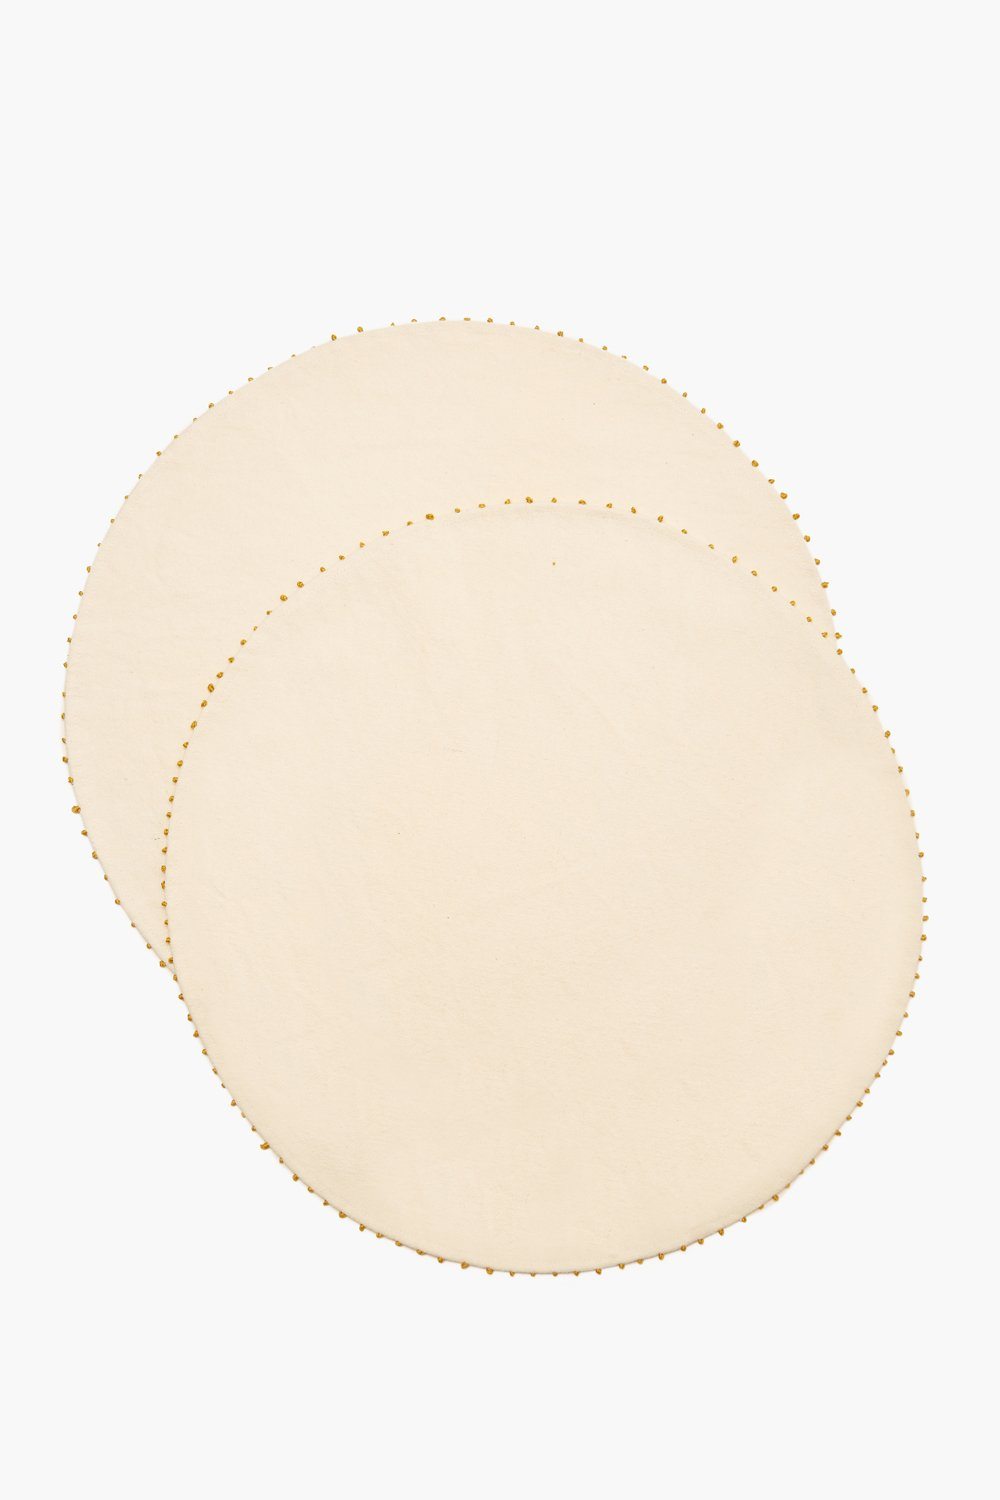 SEED PEARL PLACEMAT SETS